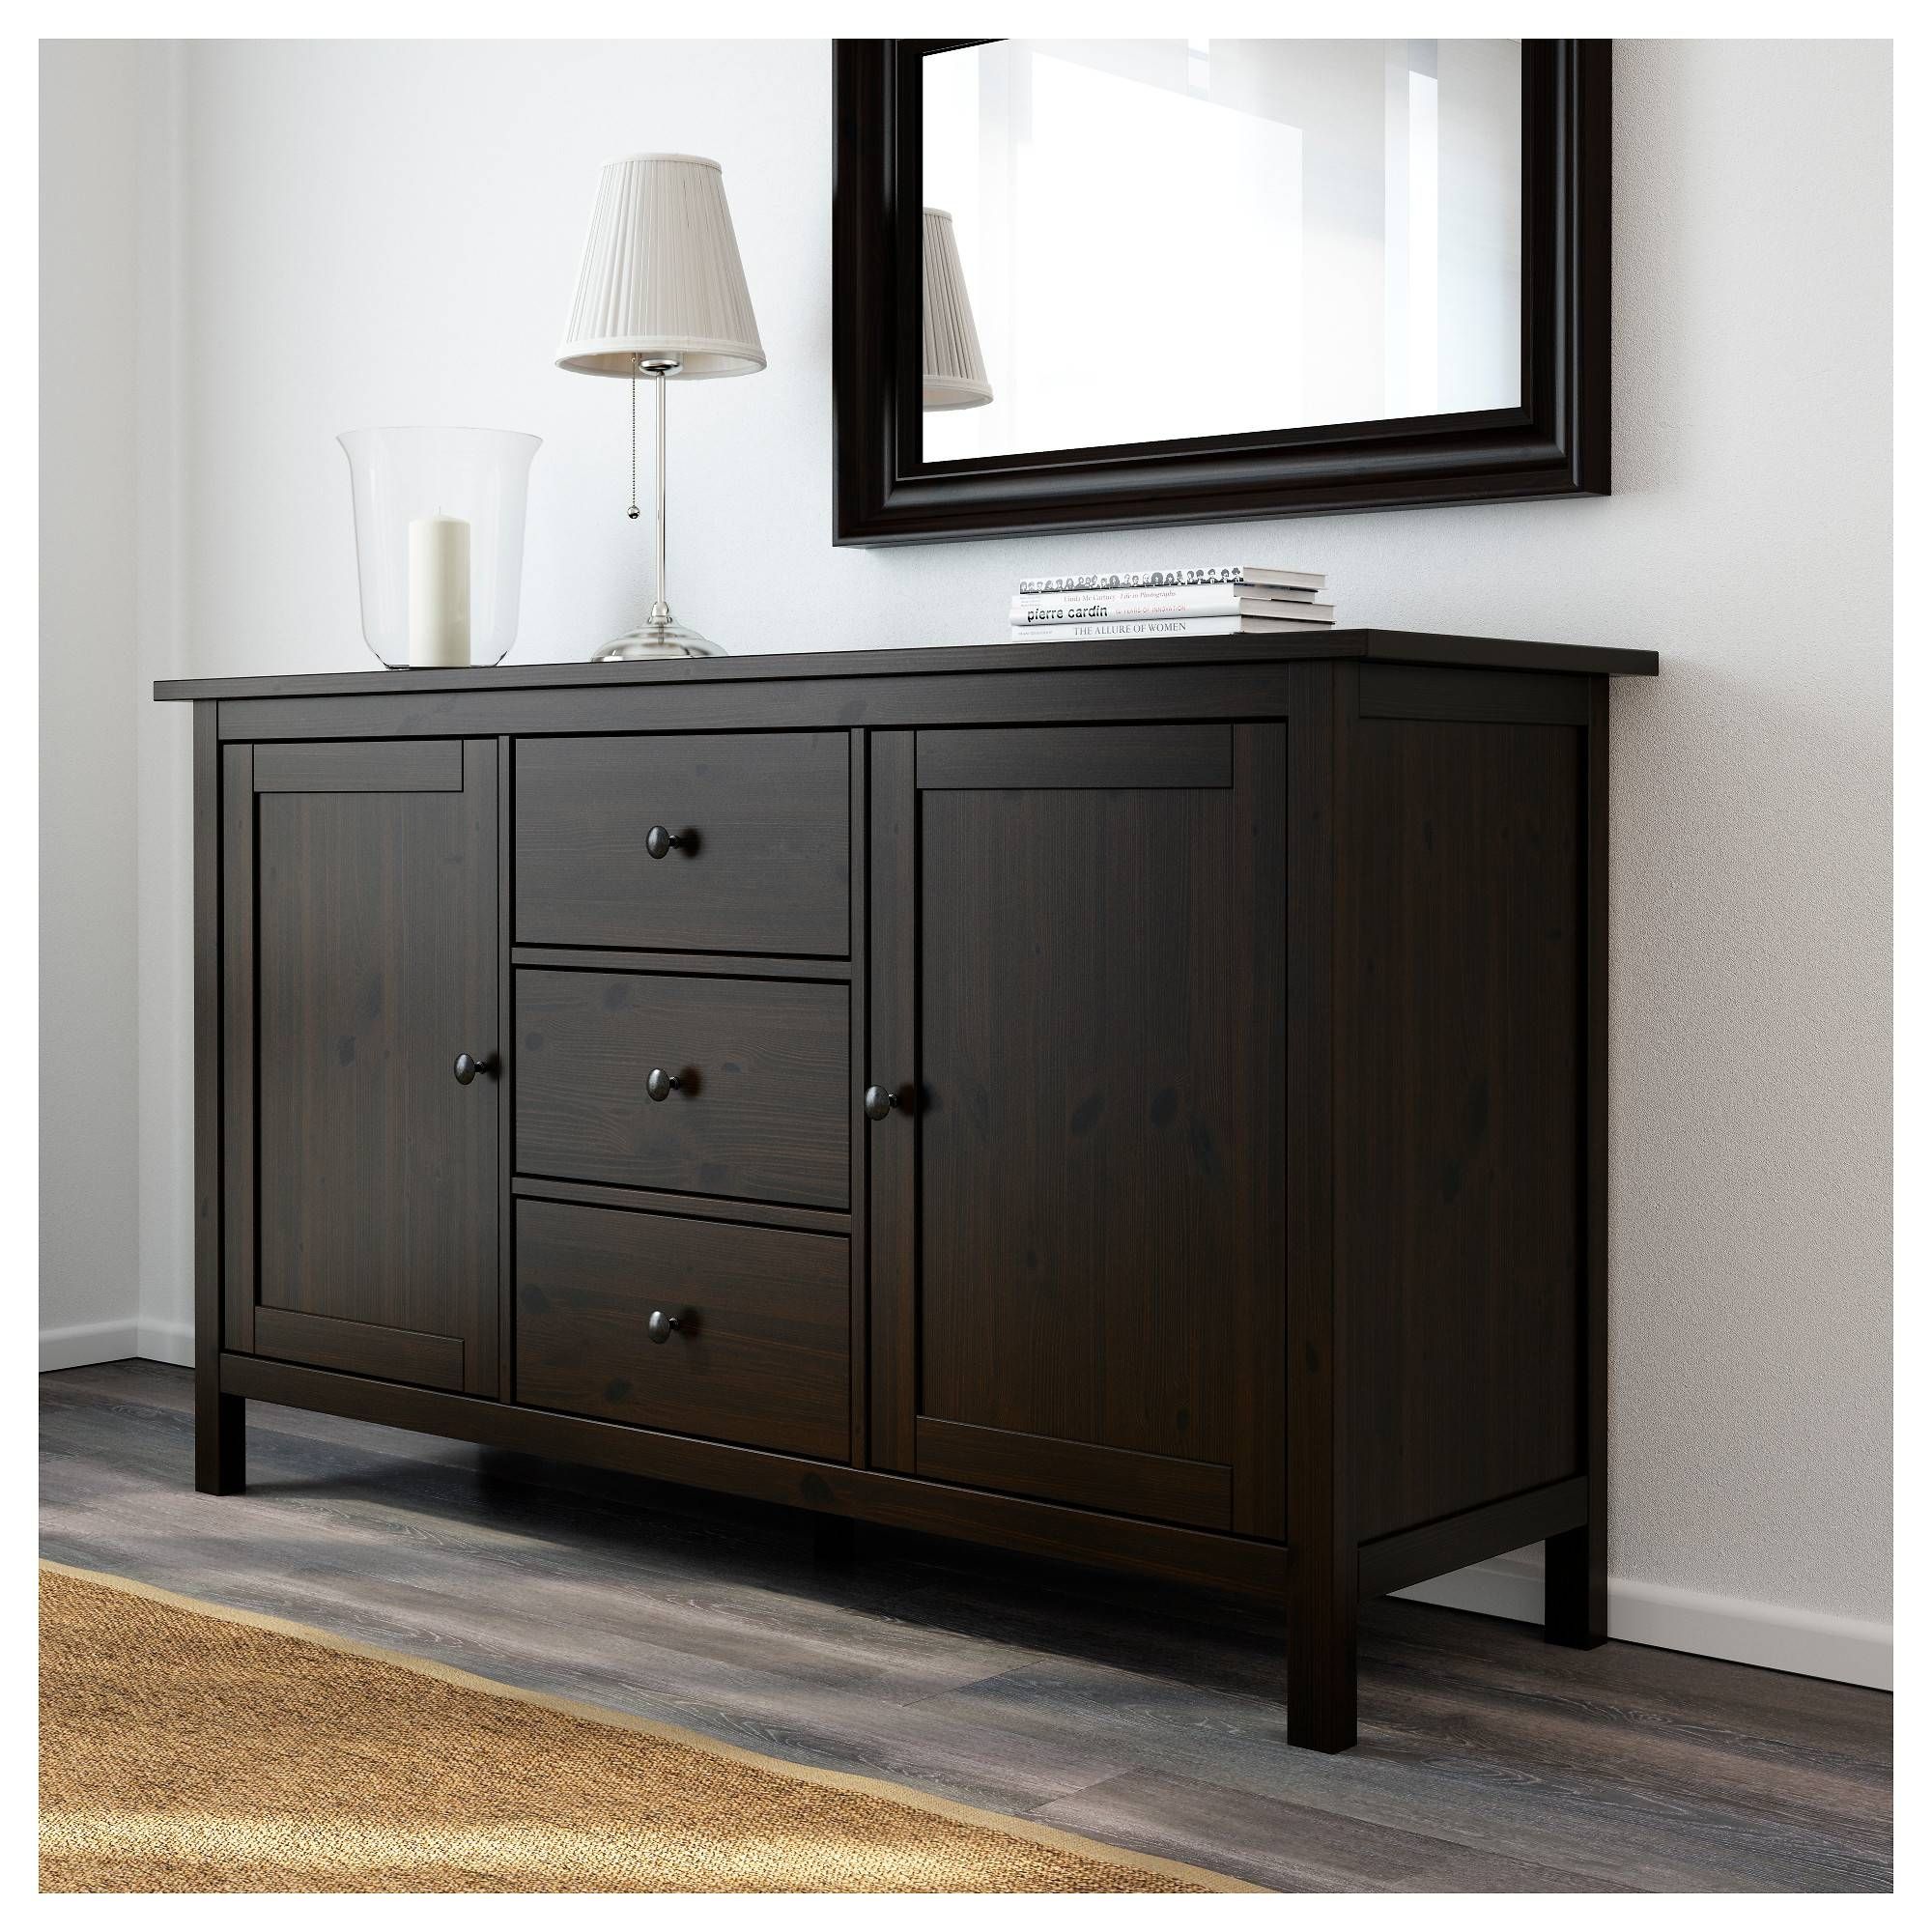 Hemnes Sideboard – White Stain – Ikea With Regard To Hemnes Sideboards (View 3 of 15)